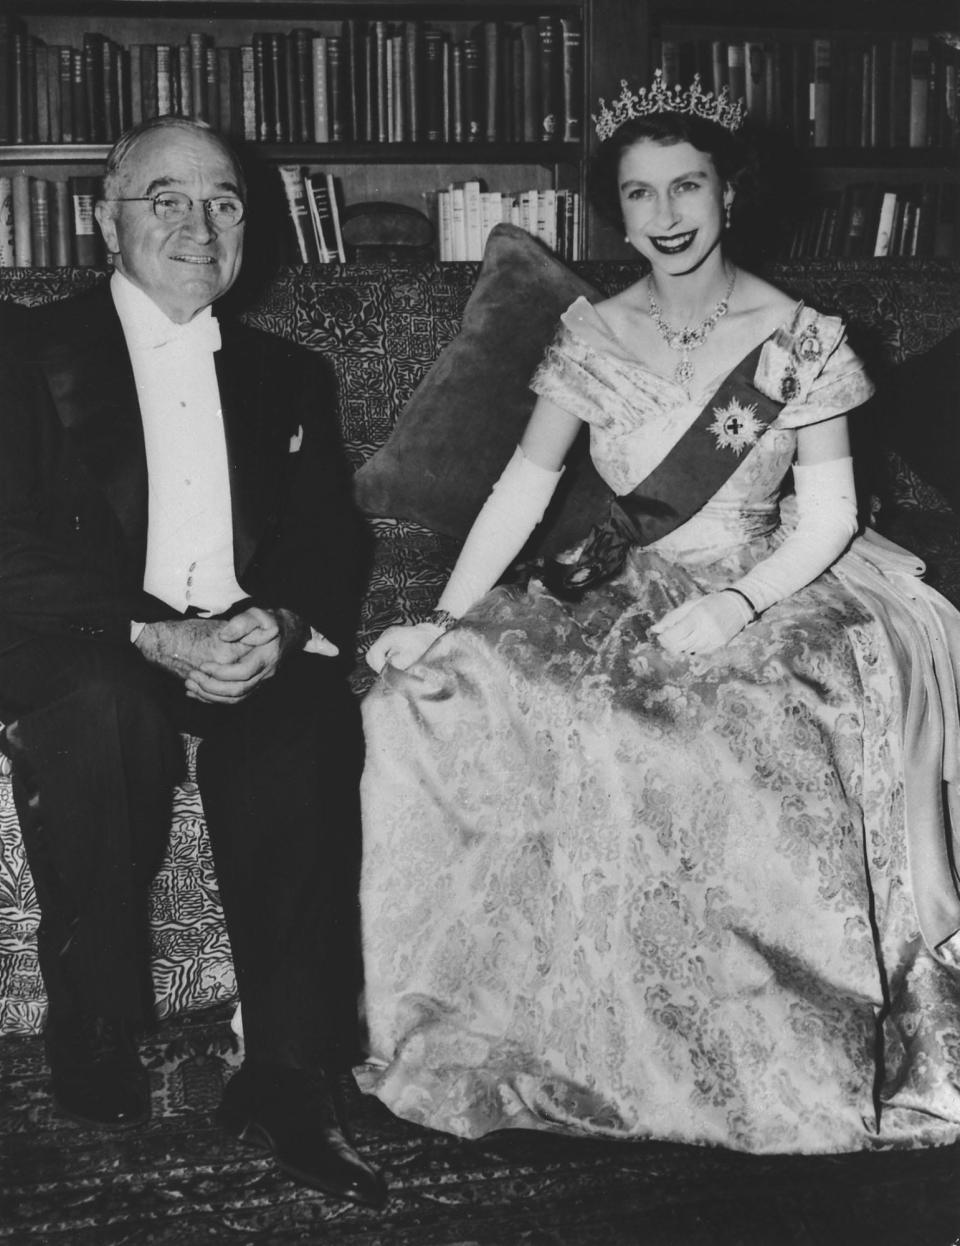 The Queen, as Princess Elizabeth, is pictured with president Truman of the United States, at the Canadian Embassy in Washington, D.C., Nov. 1, 1951.  She did not become Queen of England until after the death of her father, King George VI,  in February 1952.